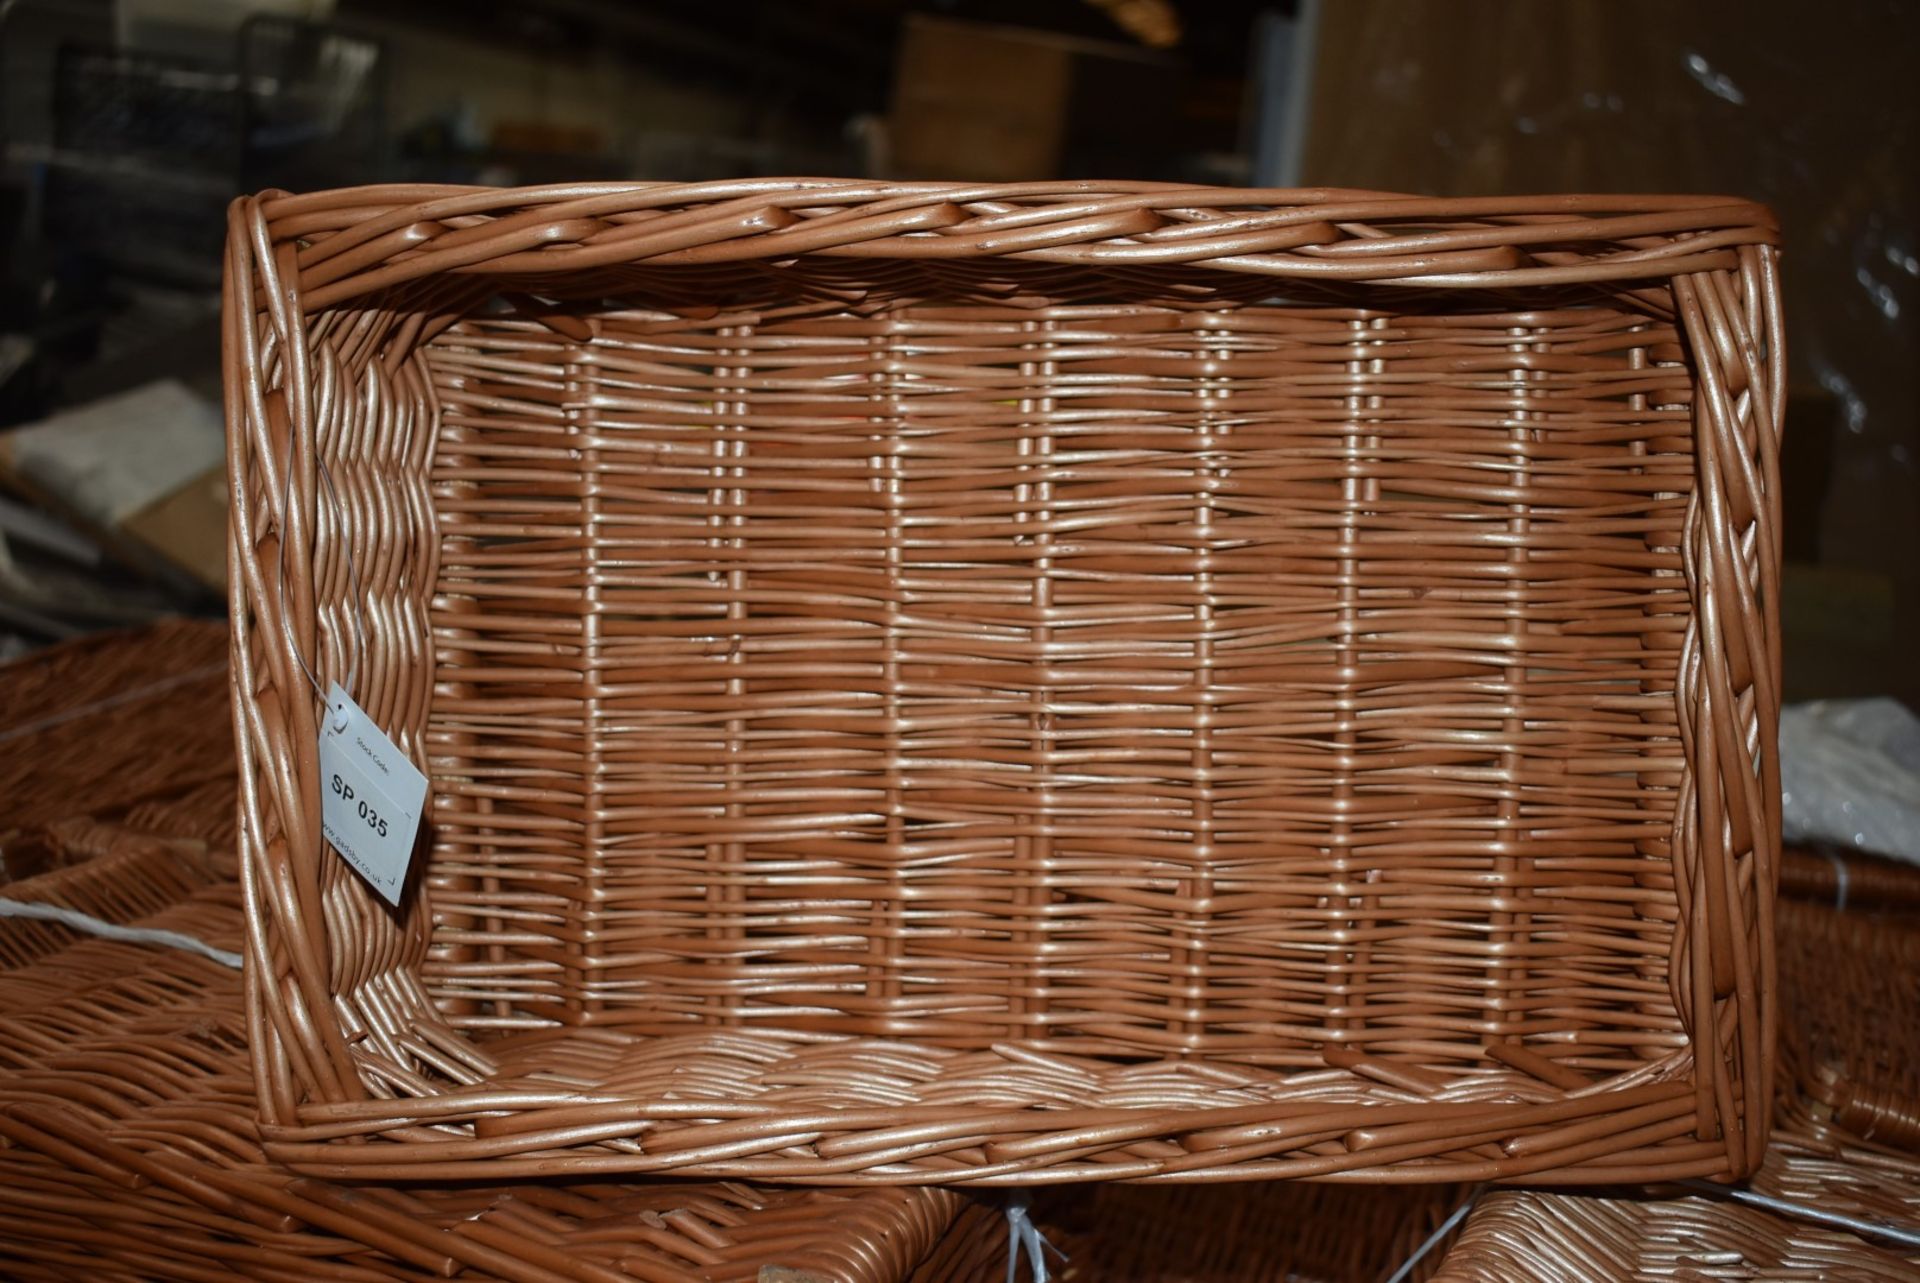 8 x Hand Woven Retail Display Sloping Wicker Baskets - Ideal For Presentation in Wide Range of - Image 9 of 10